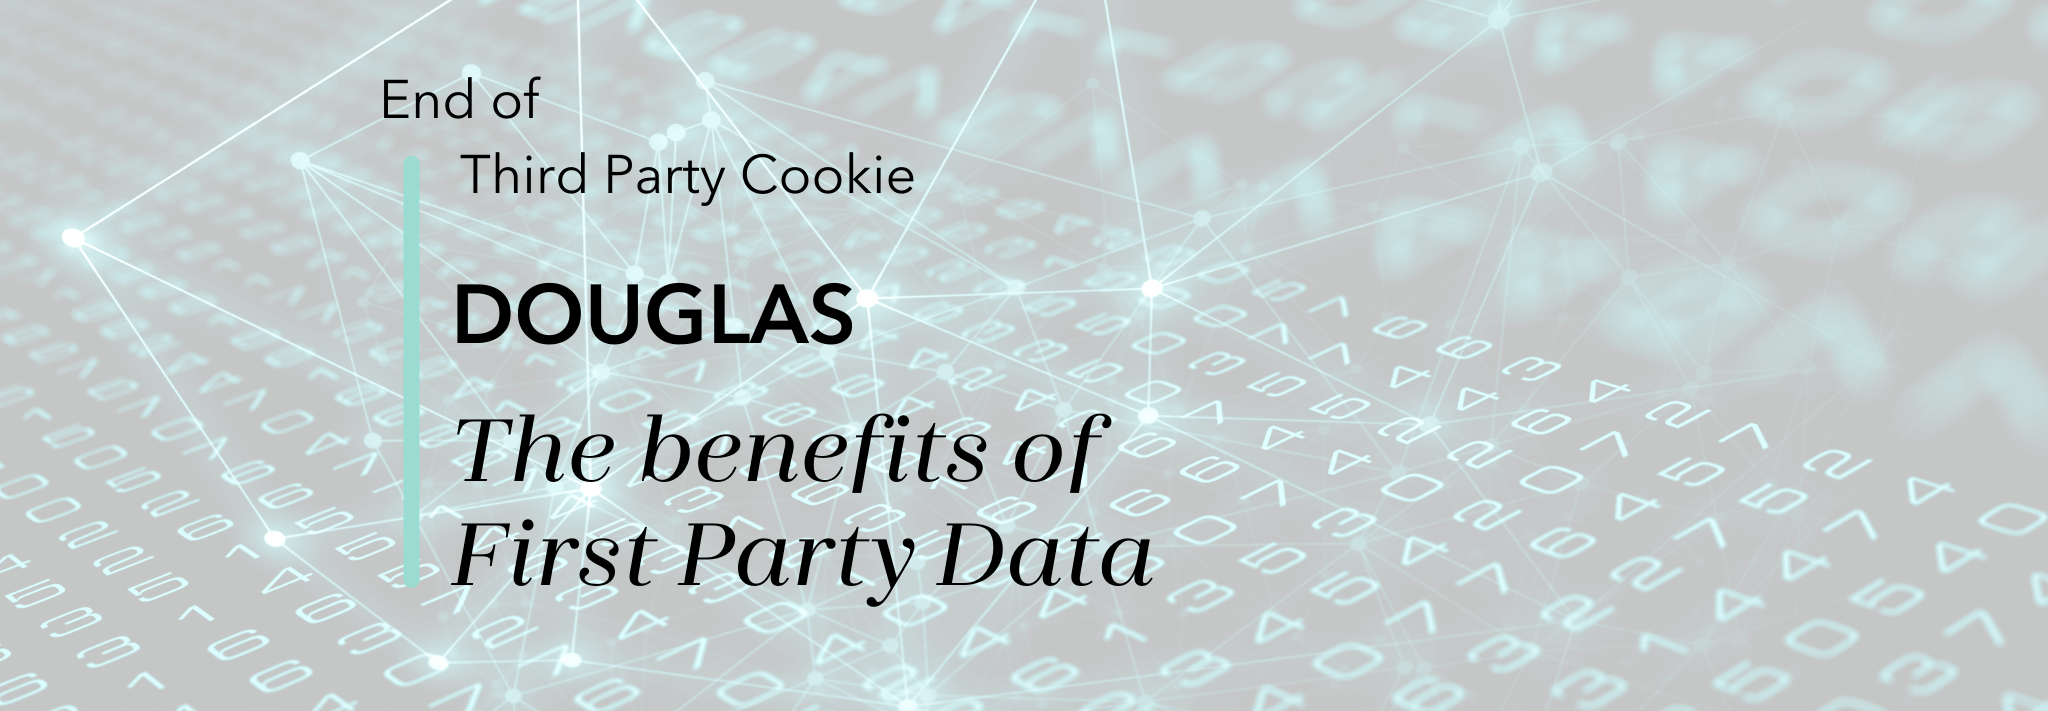 End of Third Party Cookie: The benefits of First Party Data